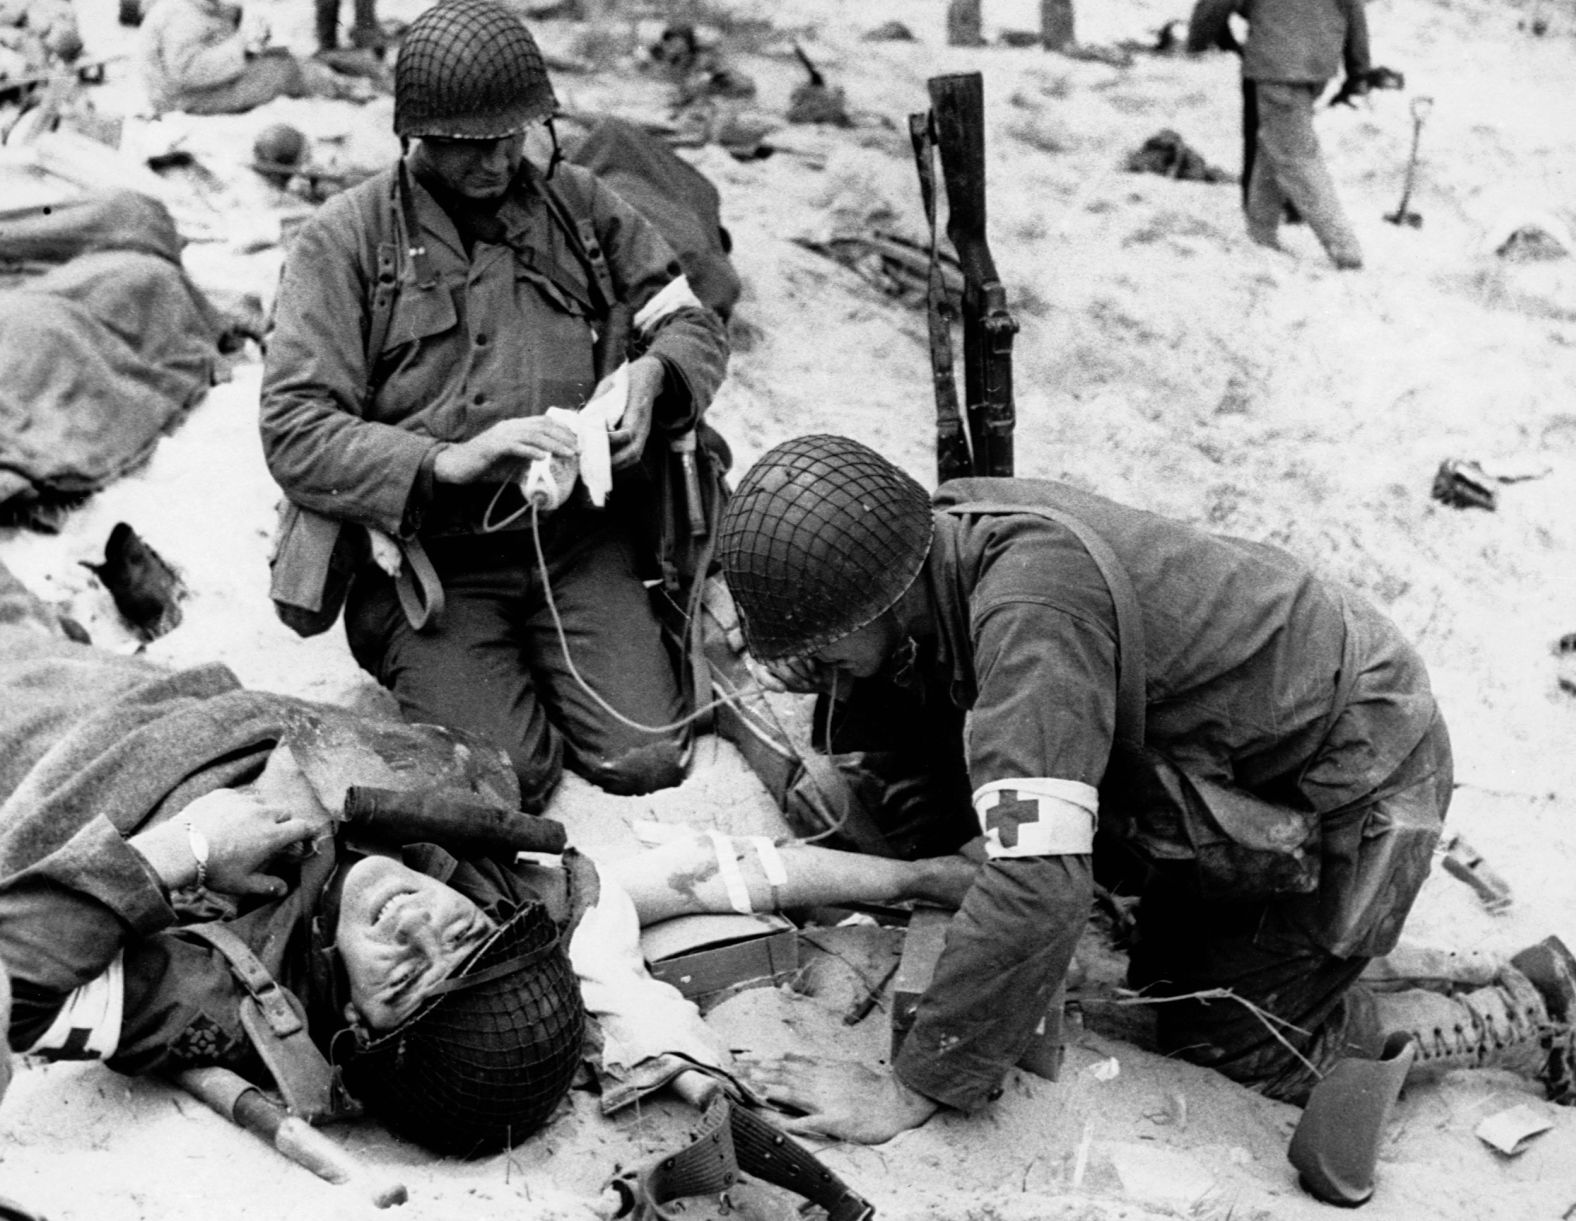 Medics start an IV as they assist a wounded soldier on shore. Heavy fire from German positions caused many casualties.